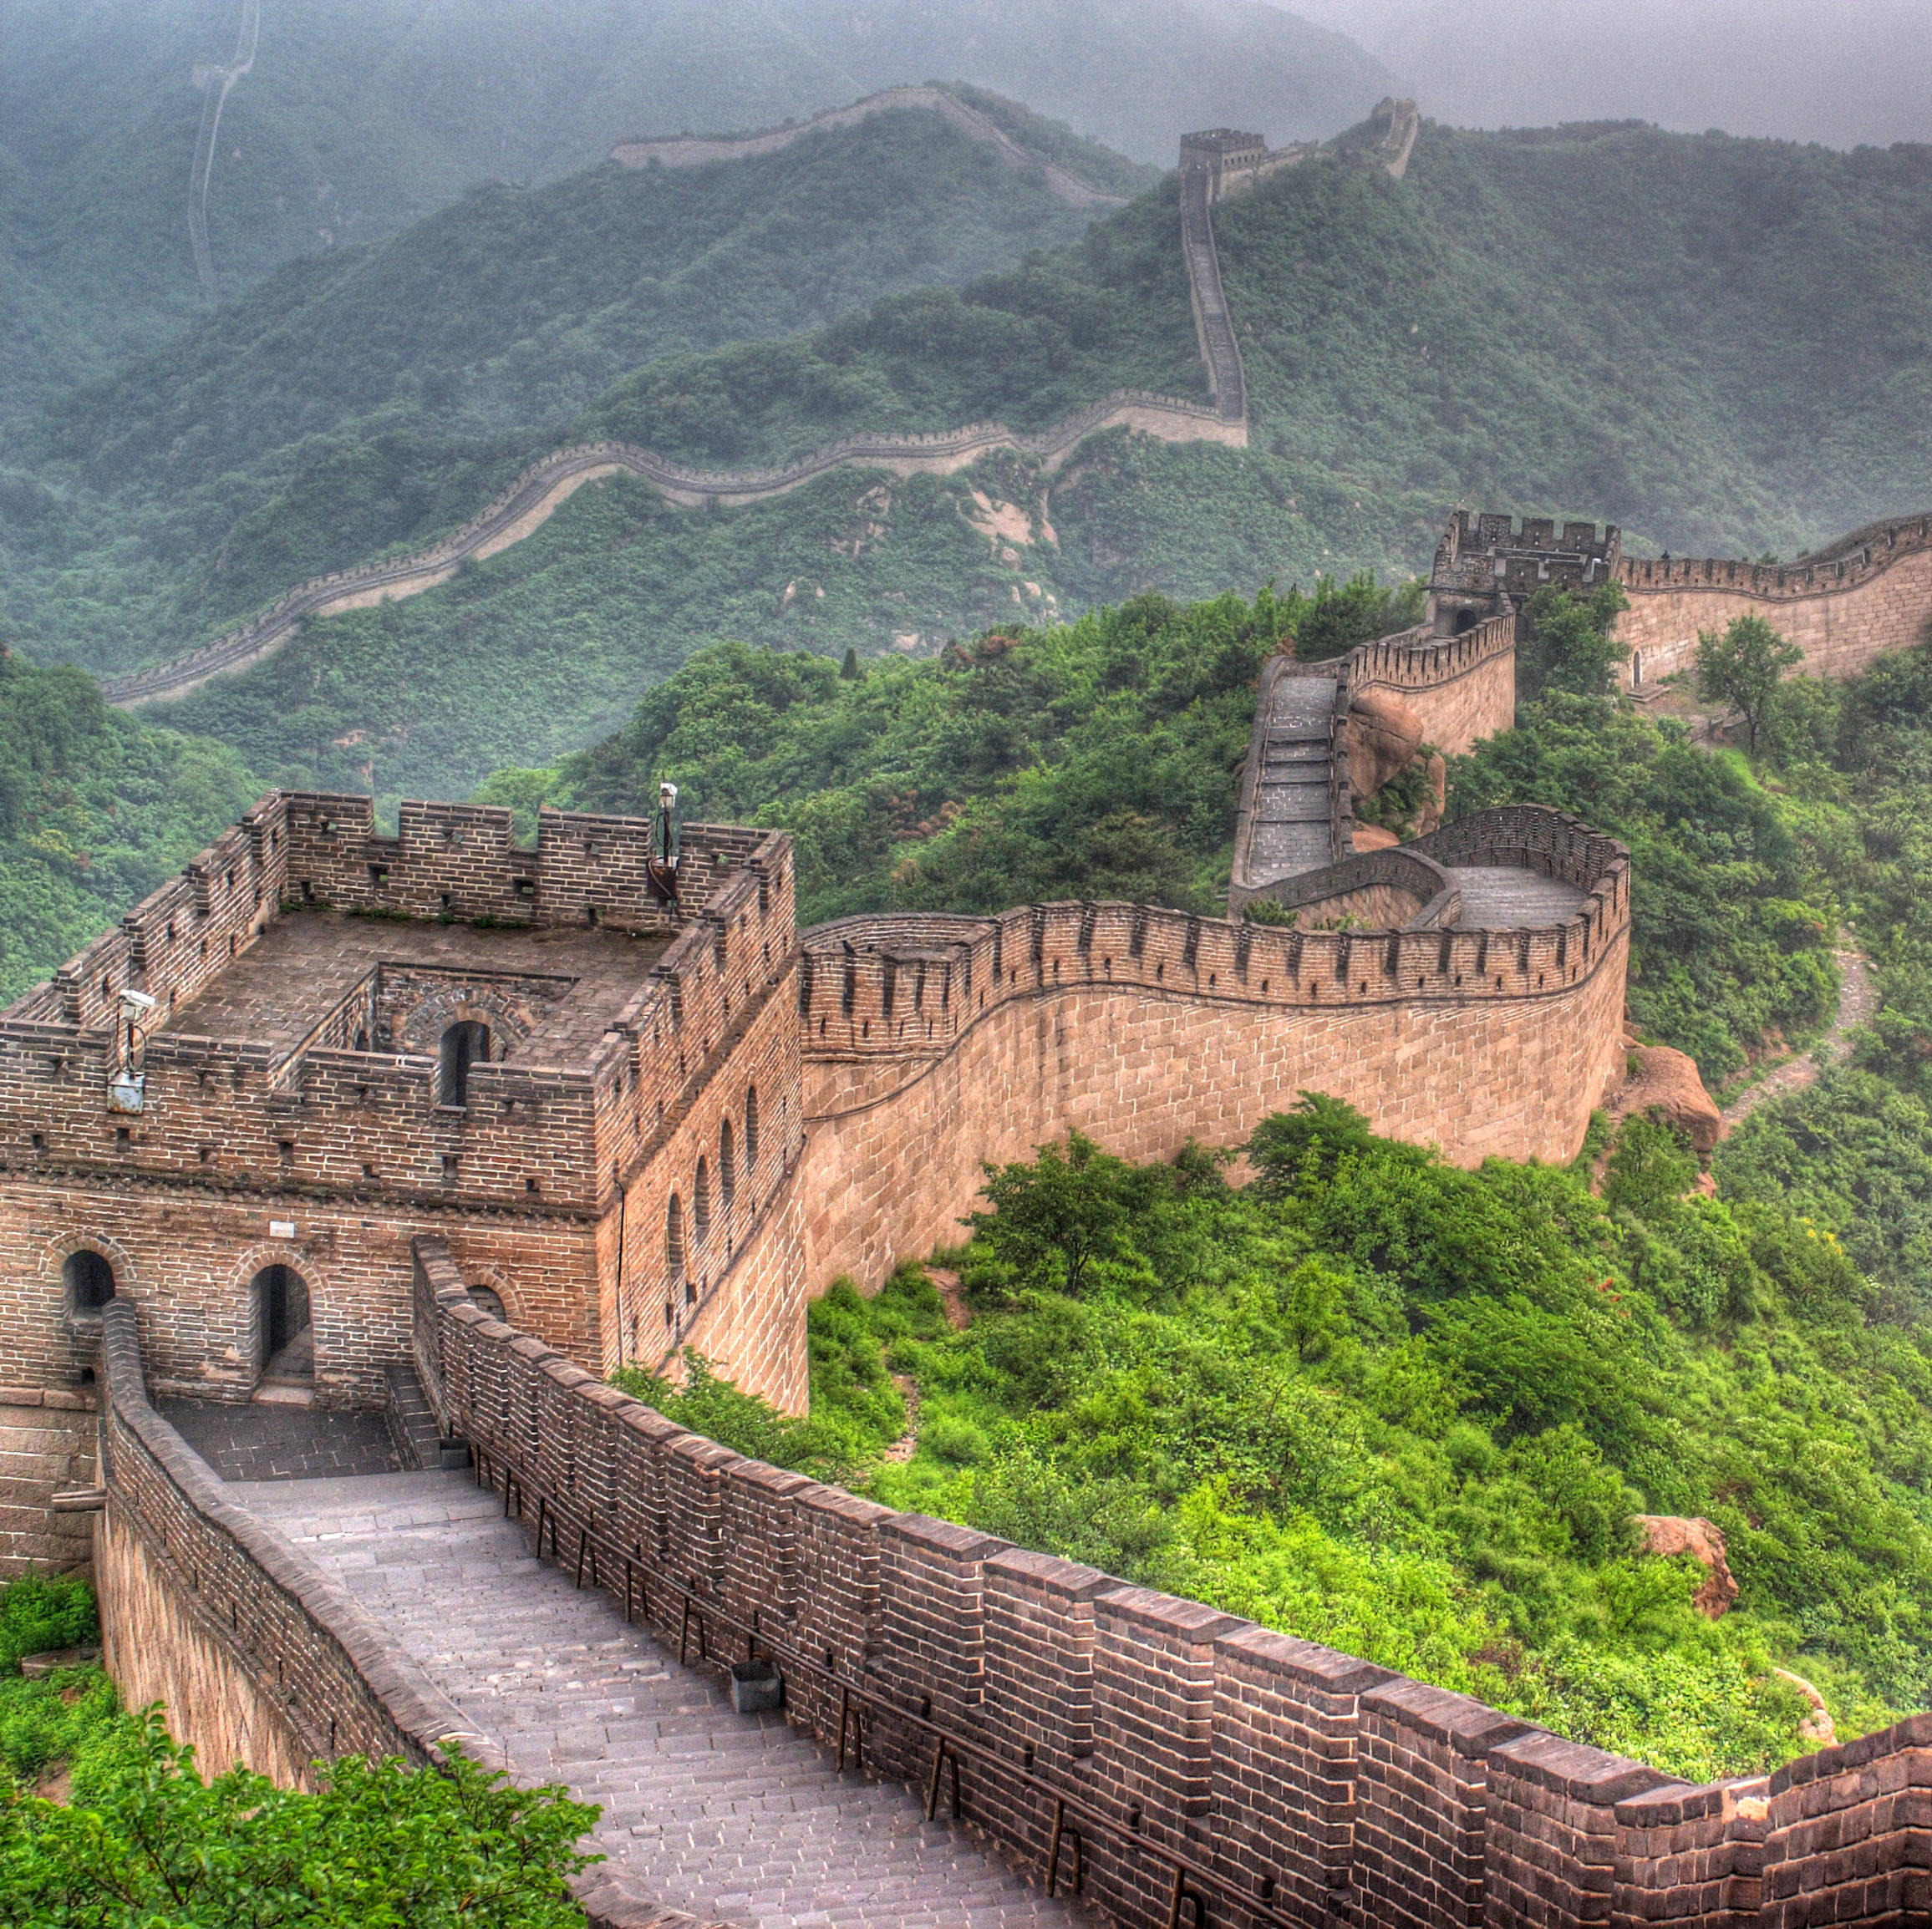 Flights to China from $306 round-trip!